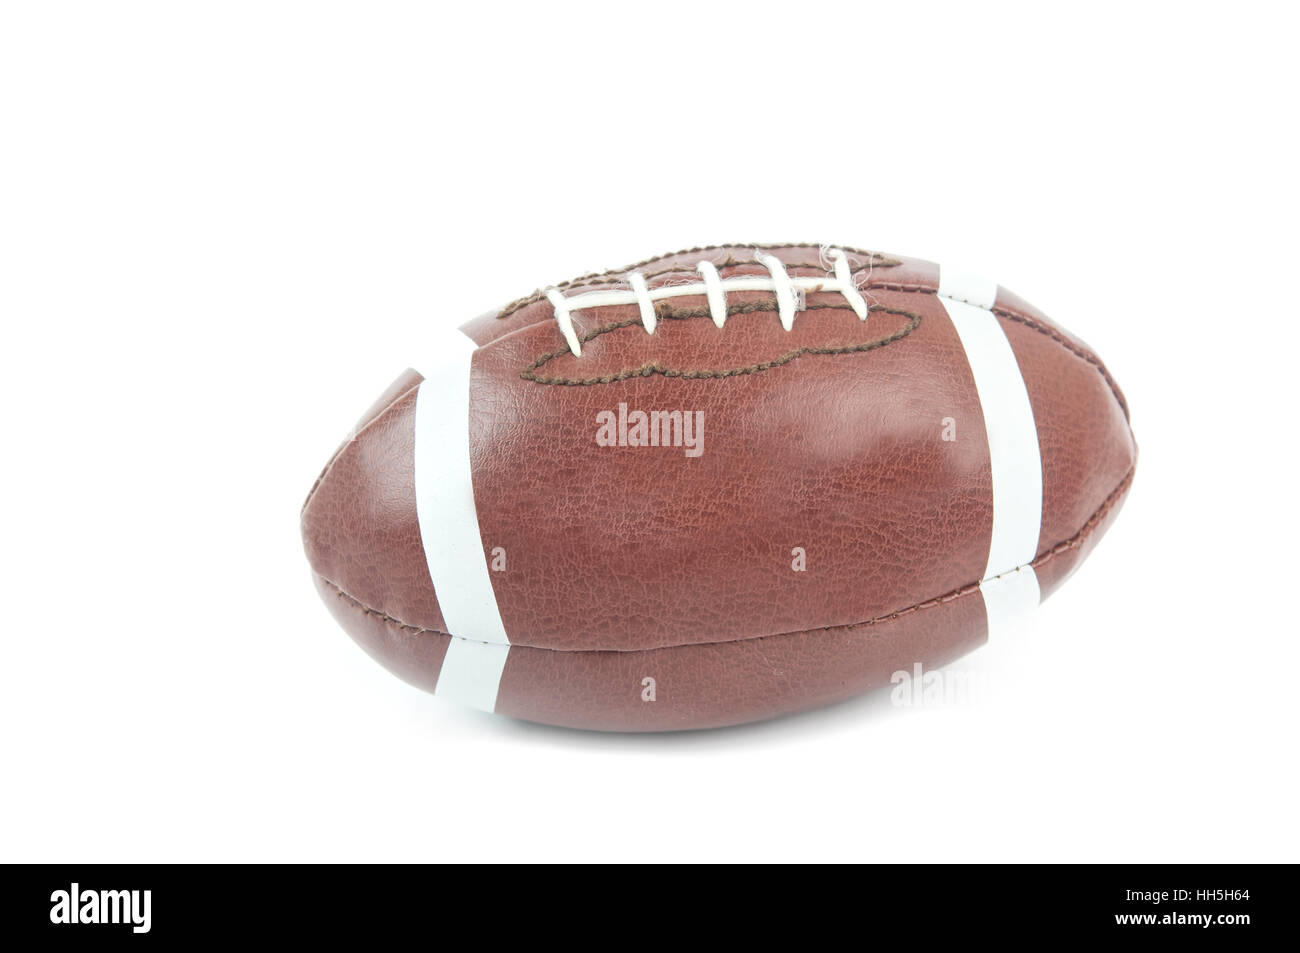 american football isolated on white background Stock Photo